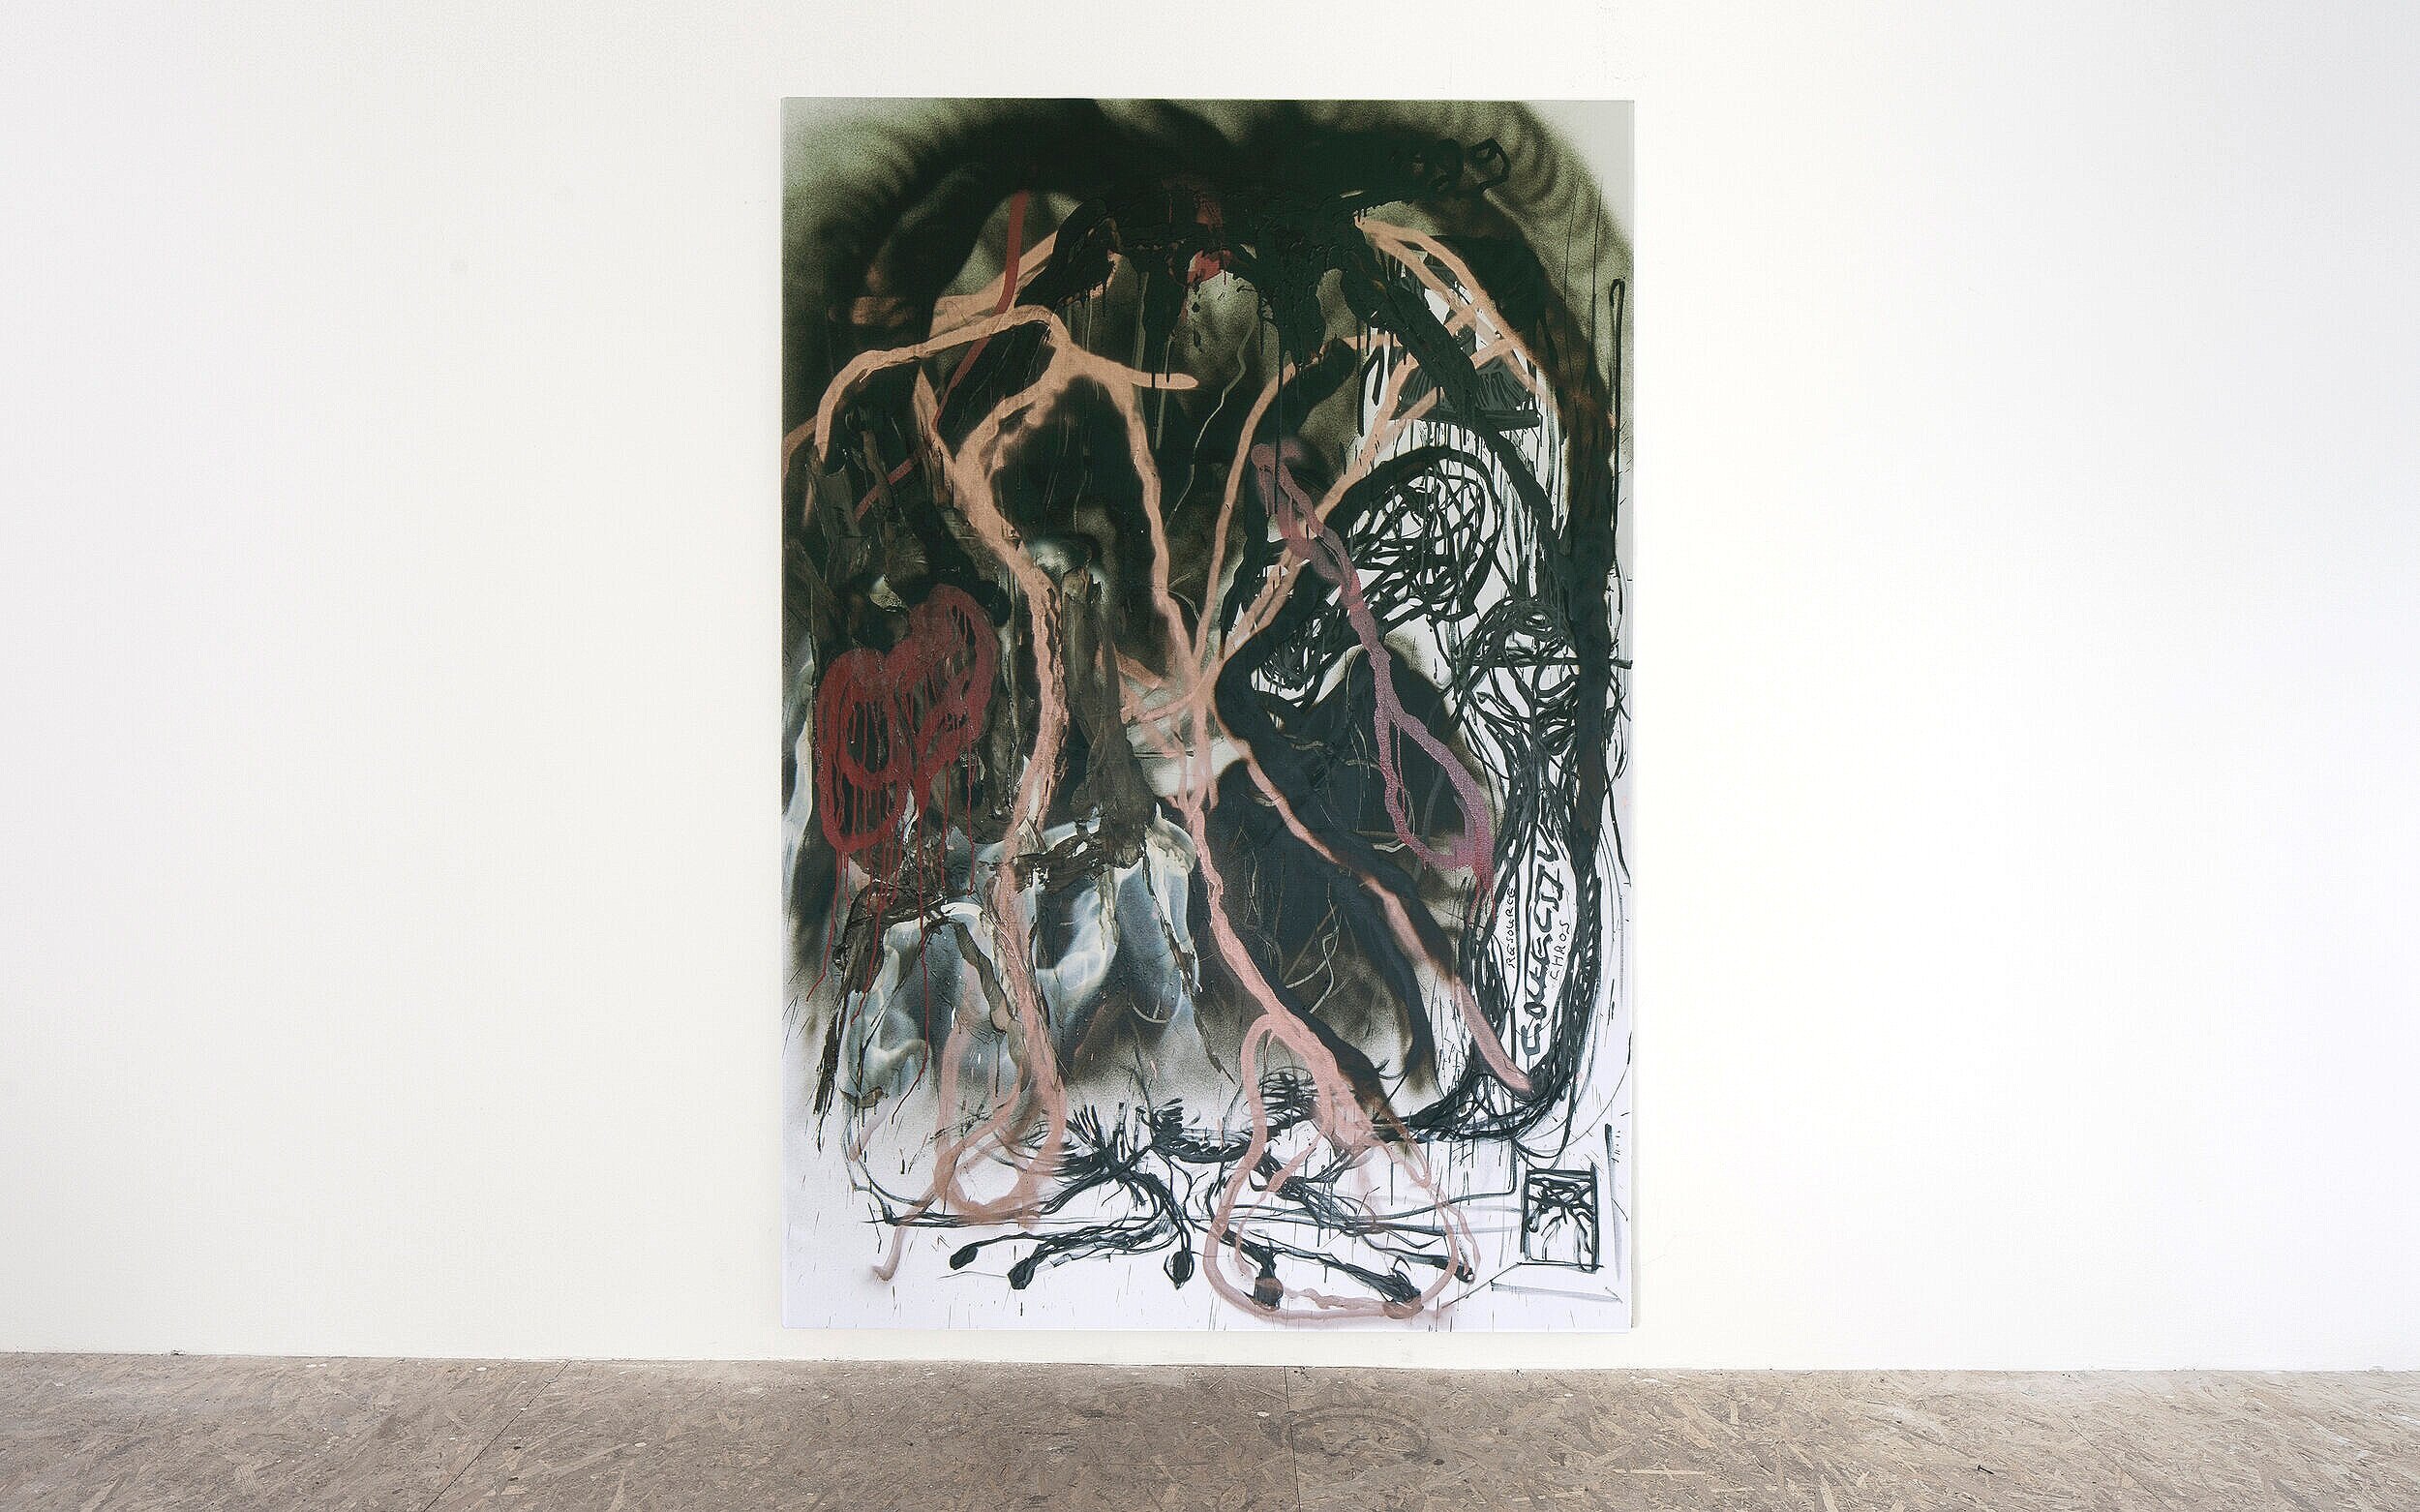  ERUPTION, 210 x 150 x 4 cm, 2020, Charcoal, Ink, permanent marker, spray paint on canvas  